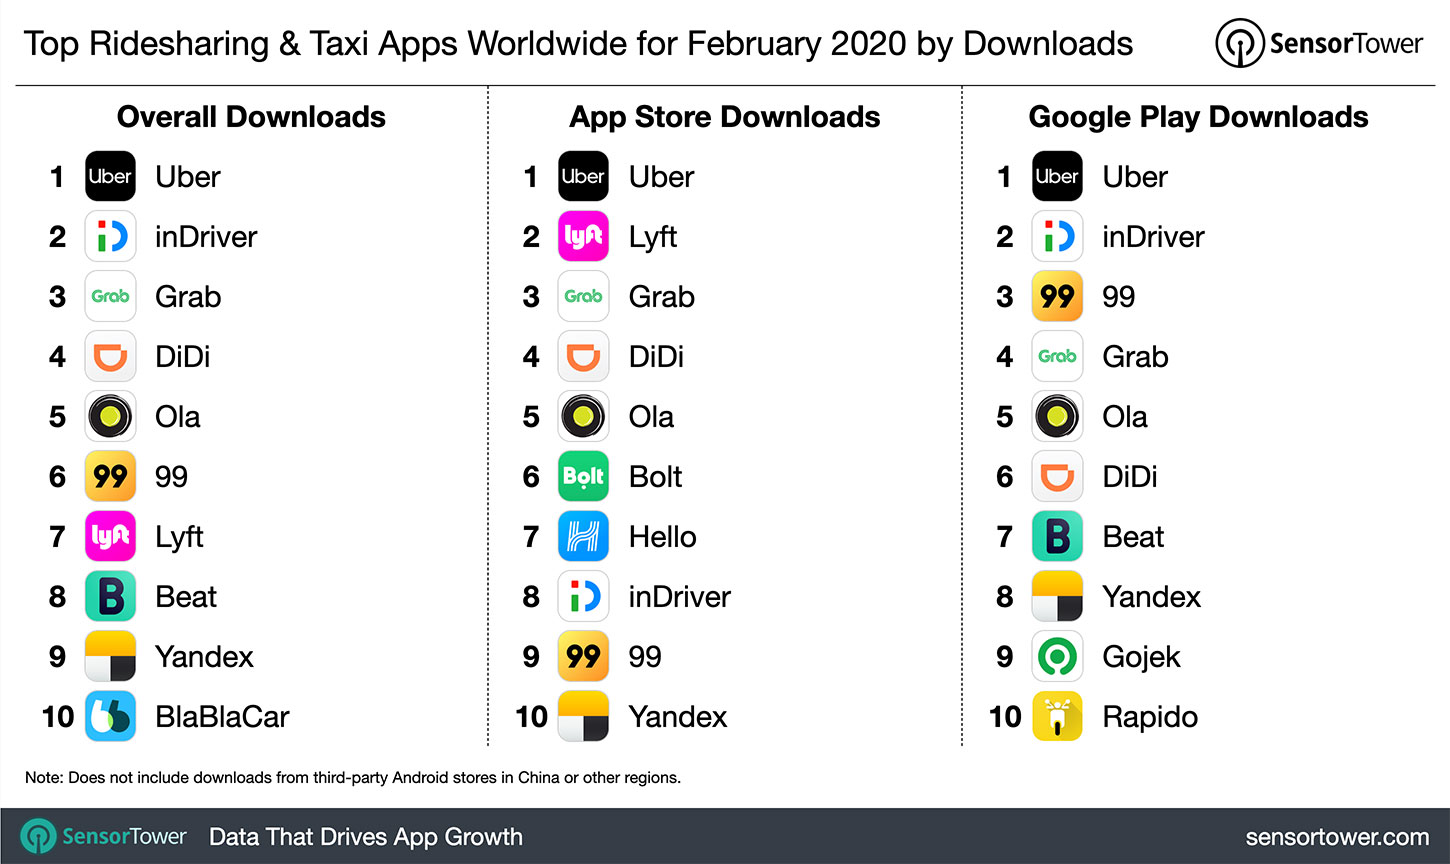 Top Ridesharing & Taxi Apps Worldwide for February 2020 by Downloads